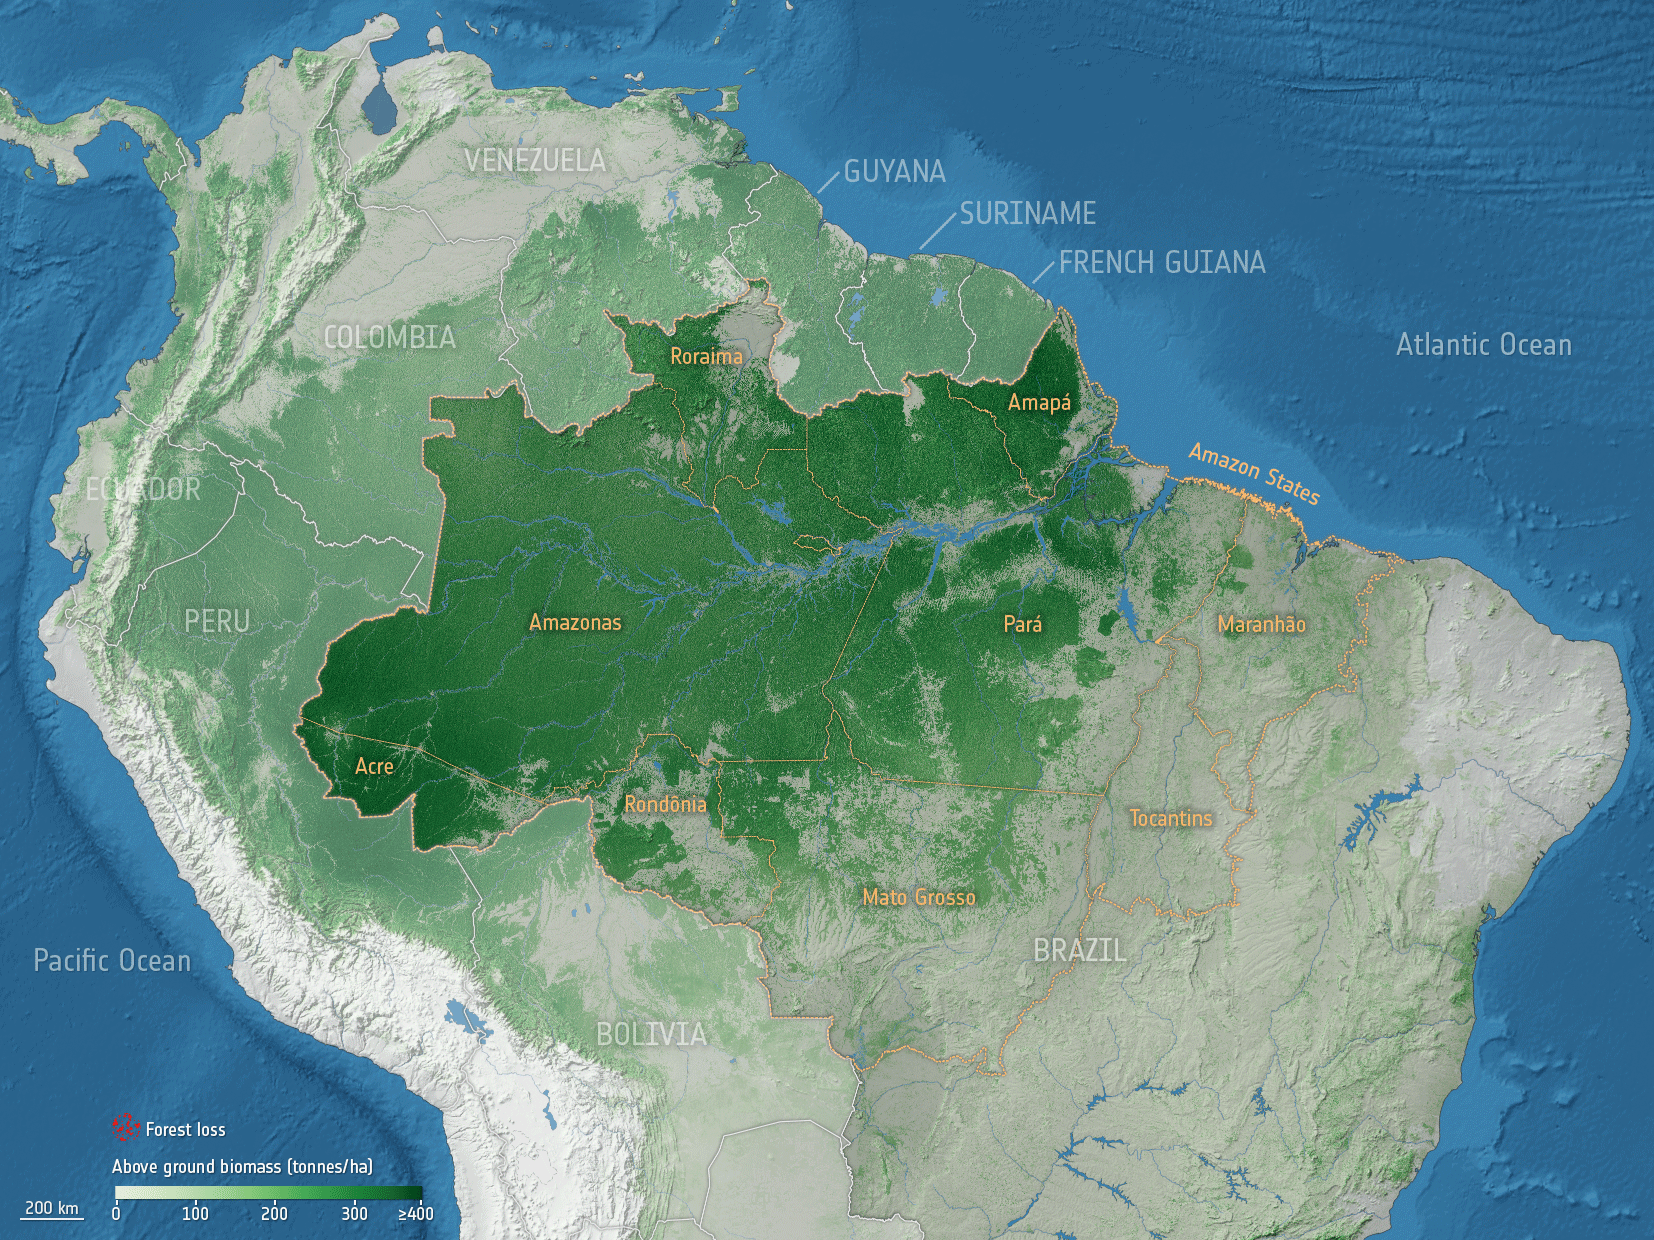 Forest loss in the Amazon basin